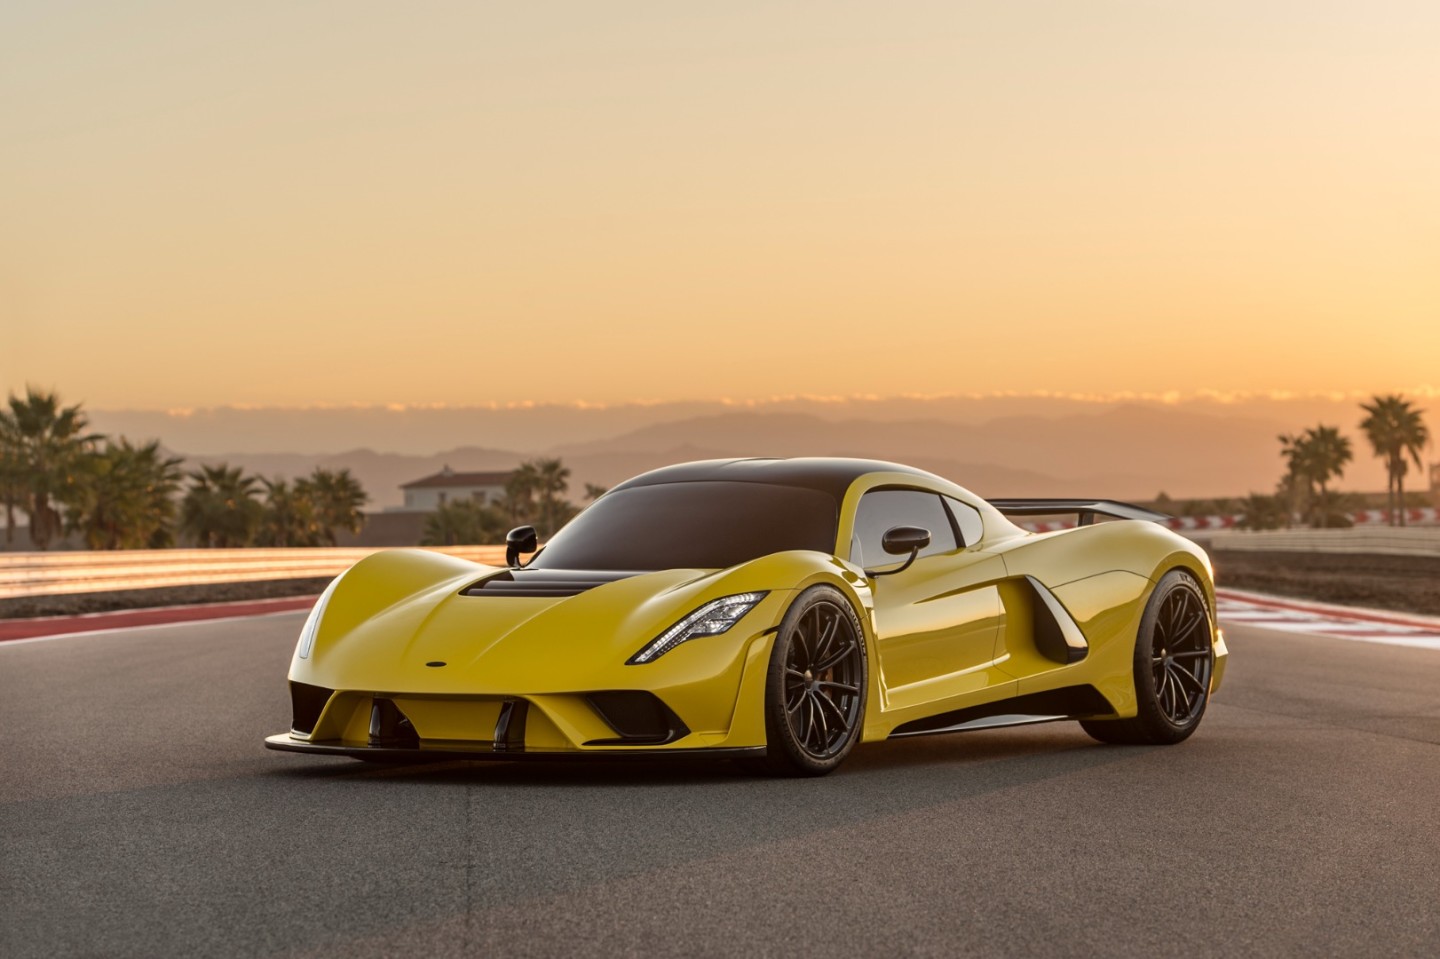 It was a long time coming, but Hennessey's new Venom F5 is finally here